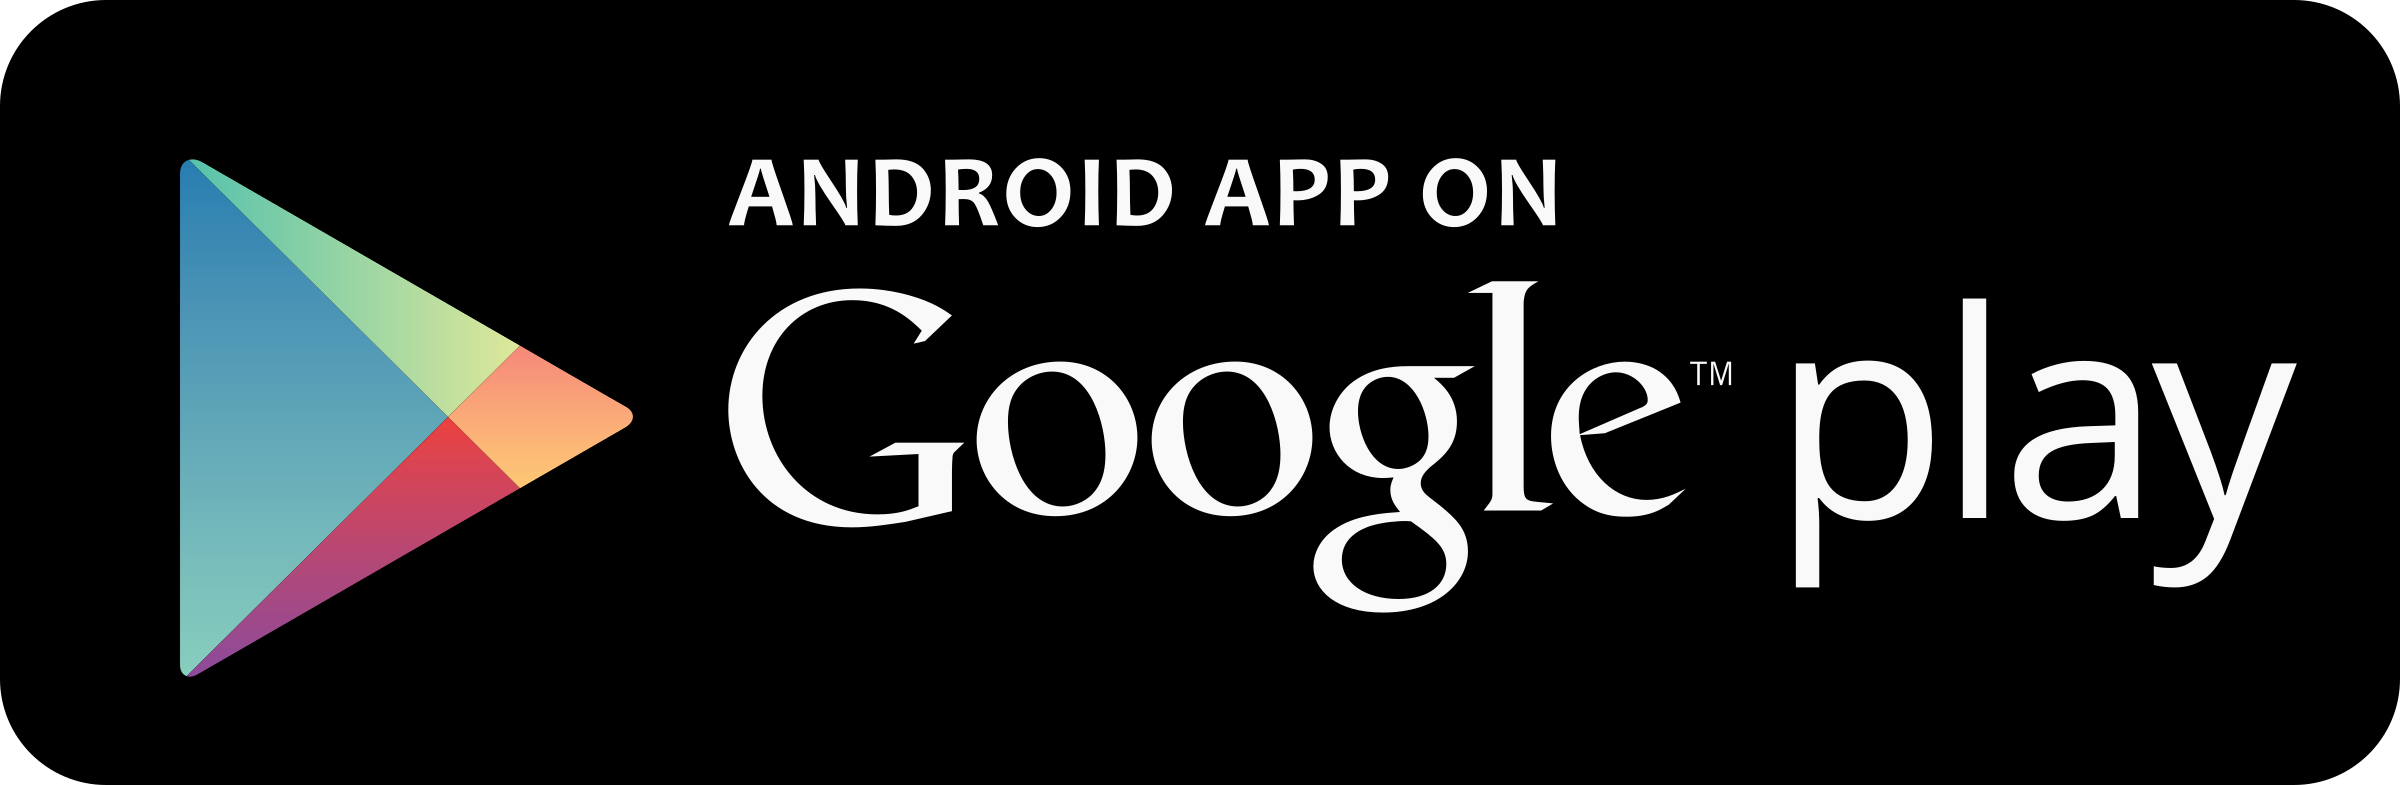 google-play-download-android-app-logo-png-transparent - Qscan